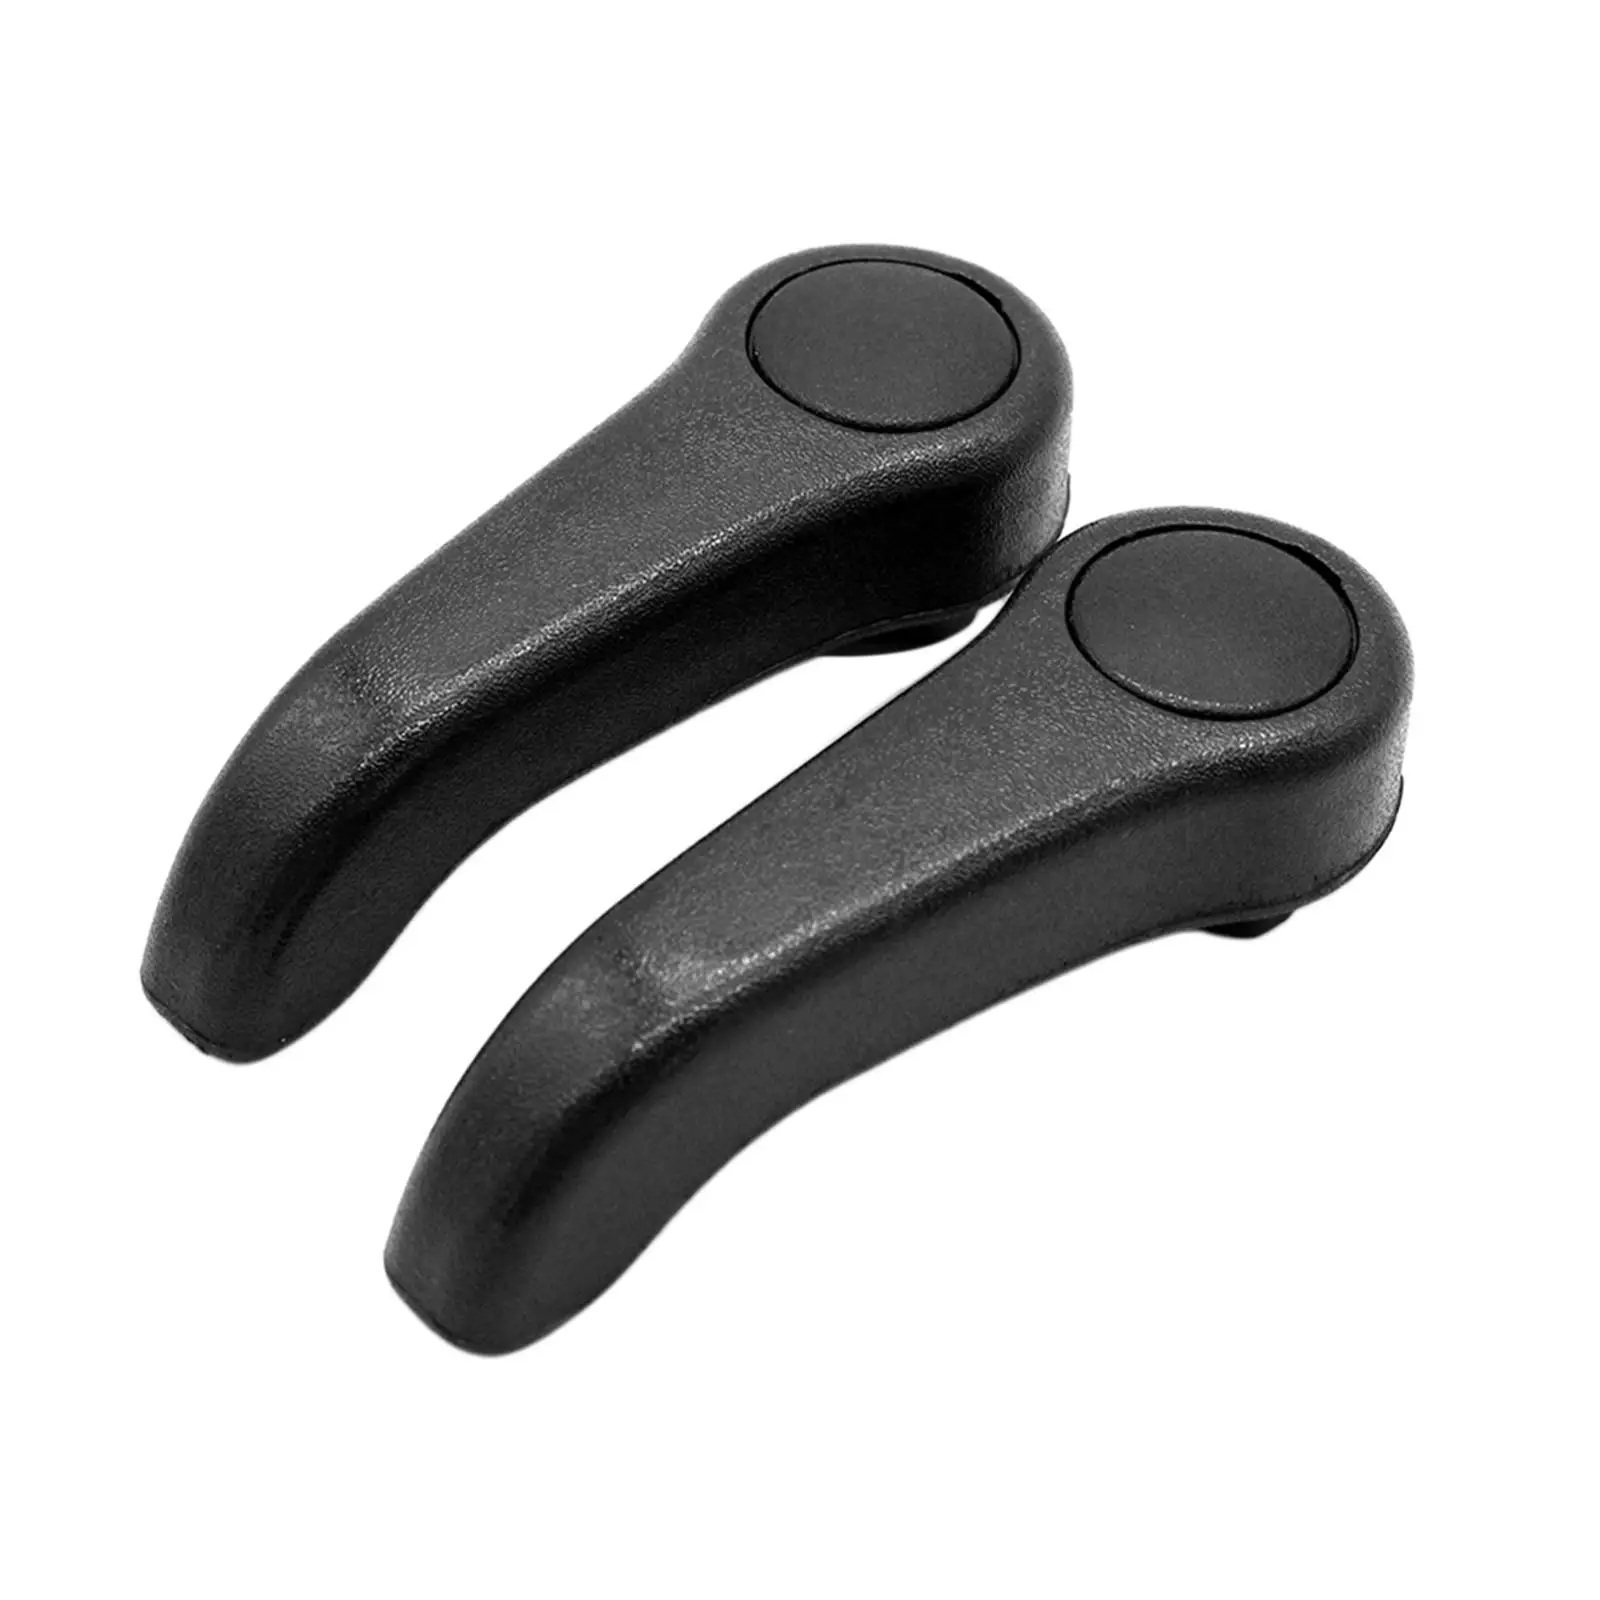 Handle Adjust Premium Replaces Easy to Install Portable Practical Black Parts Car Seat Adjuster Lever for Renault Clio MK2